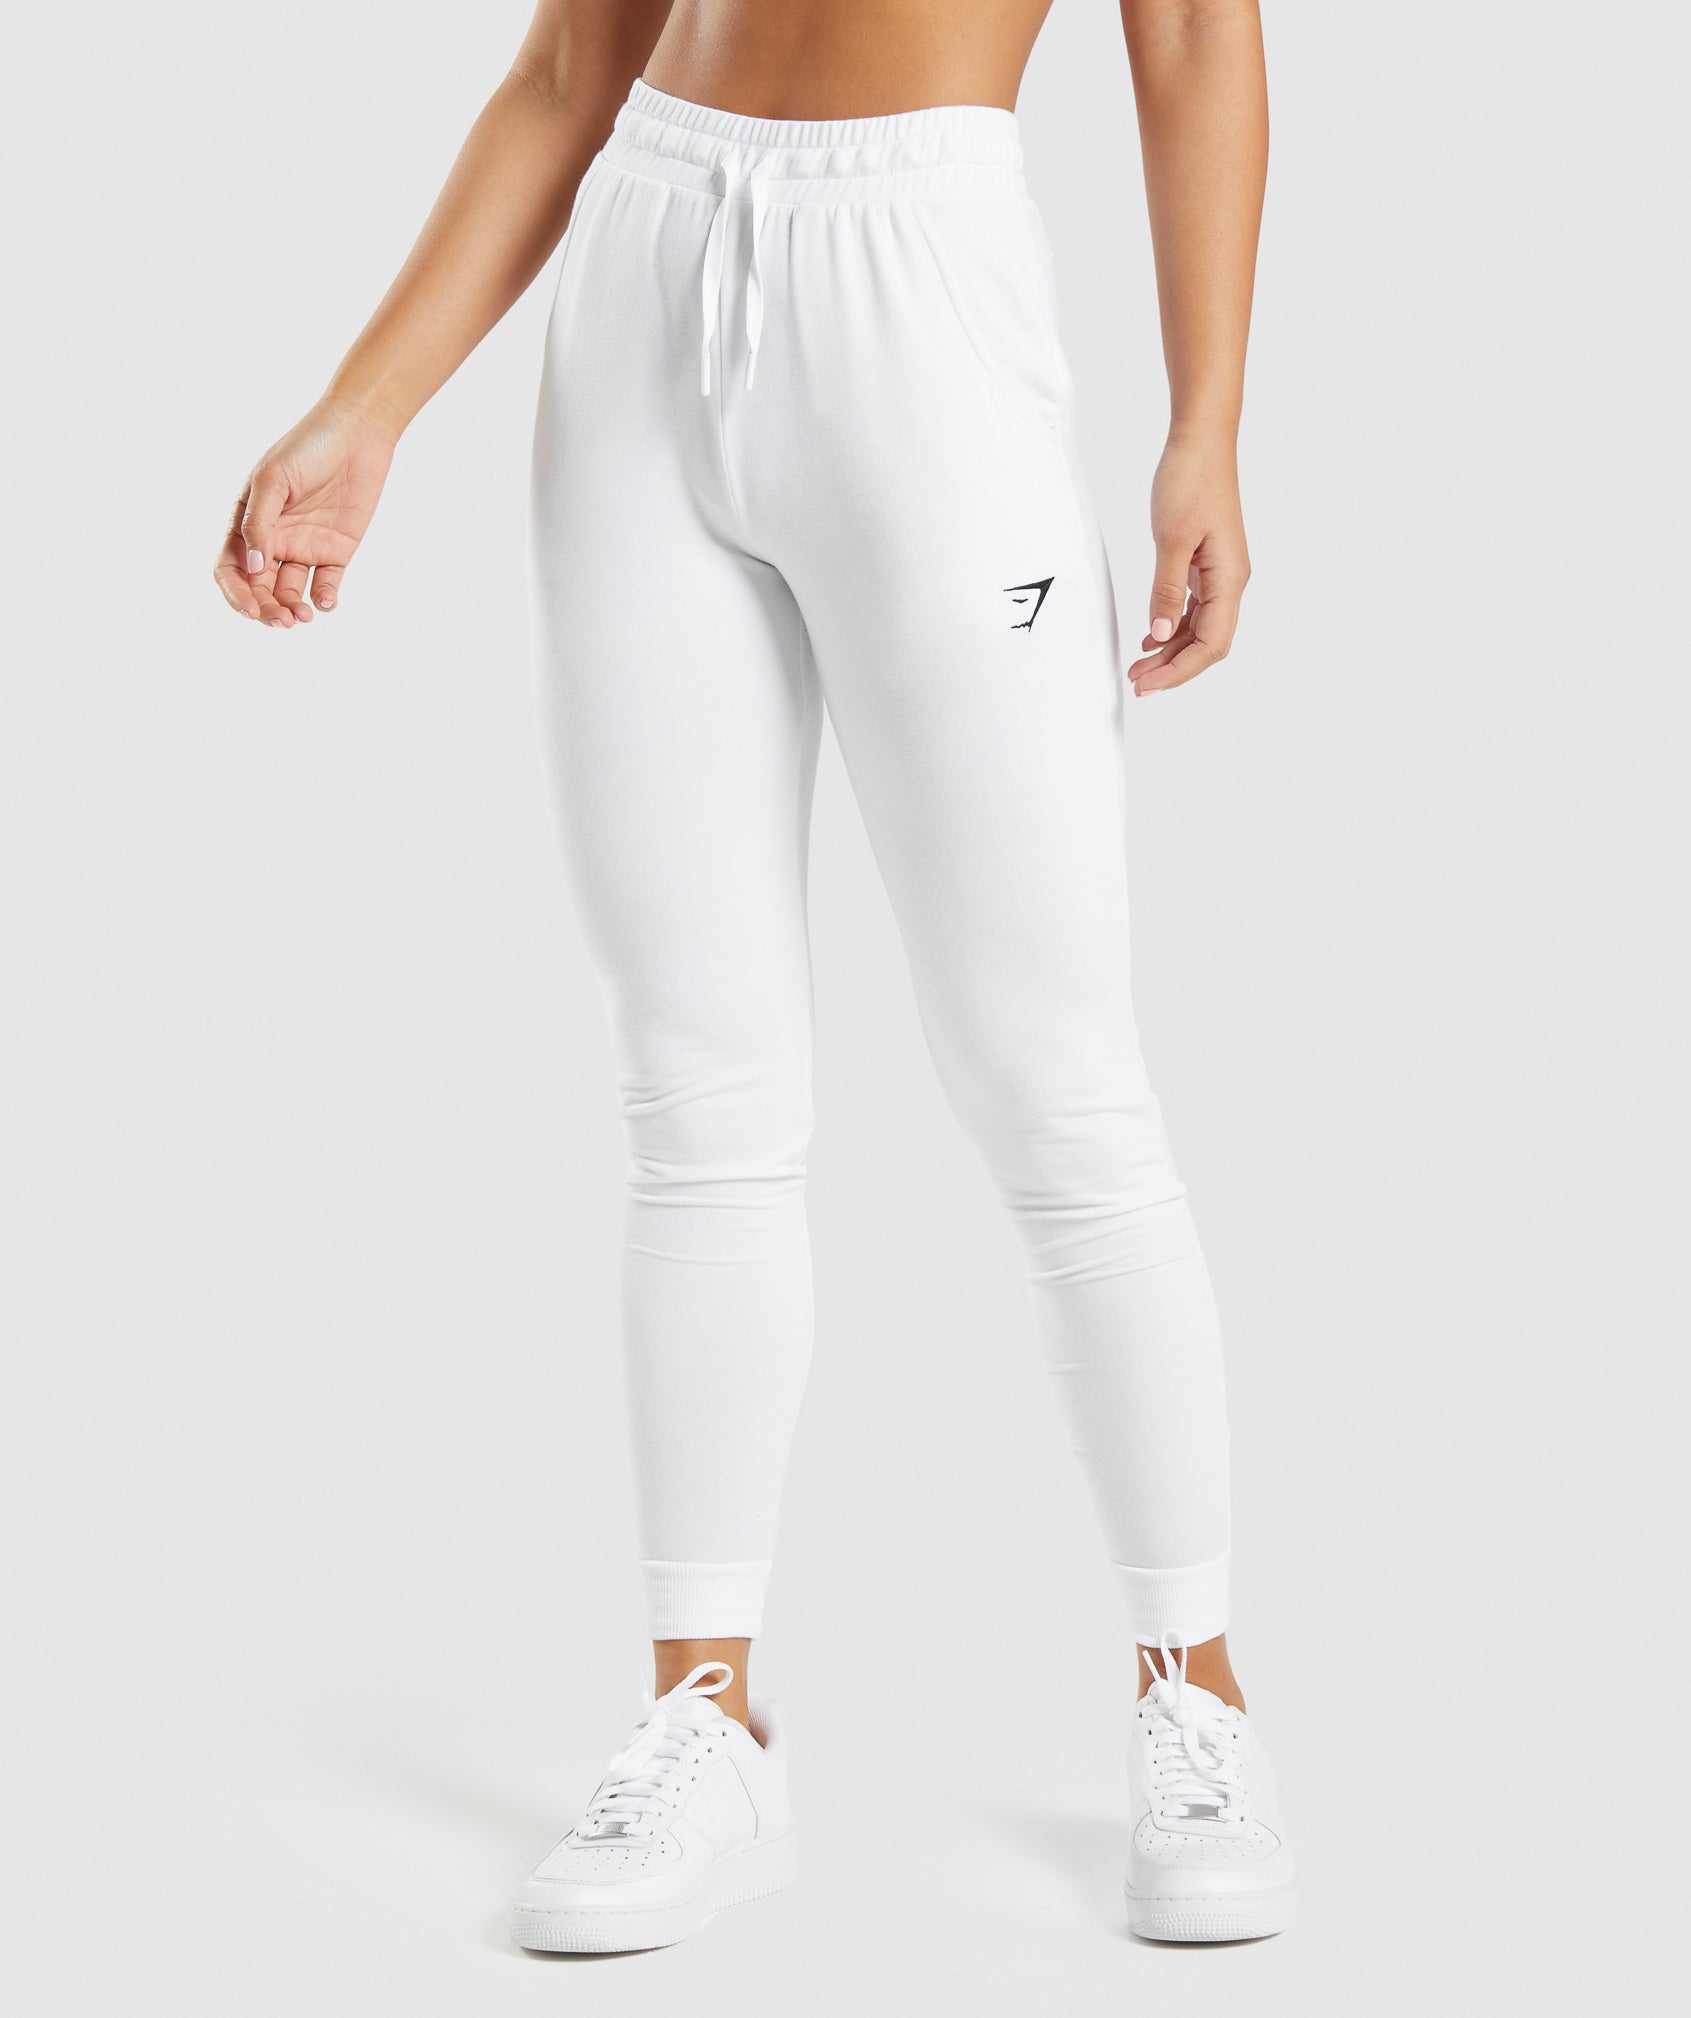 Training Pippa Joggers in White - view 1